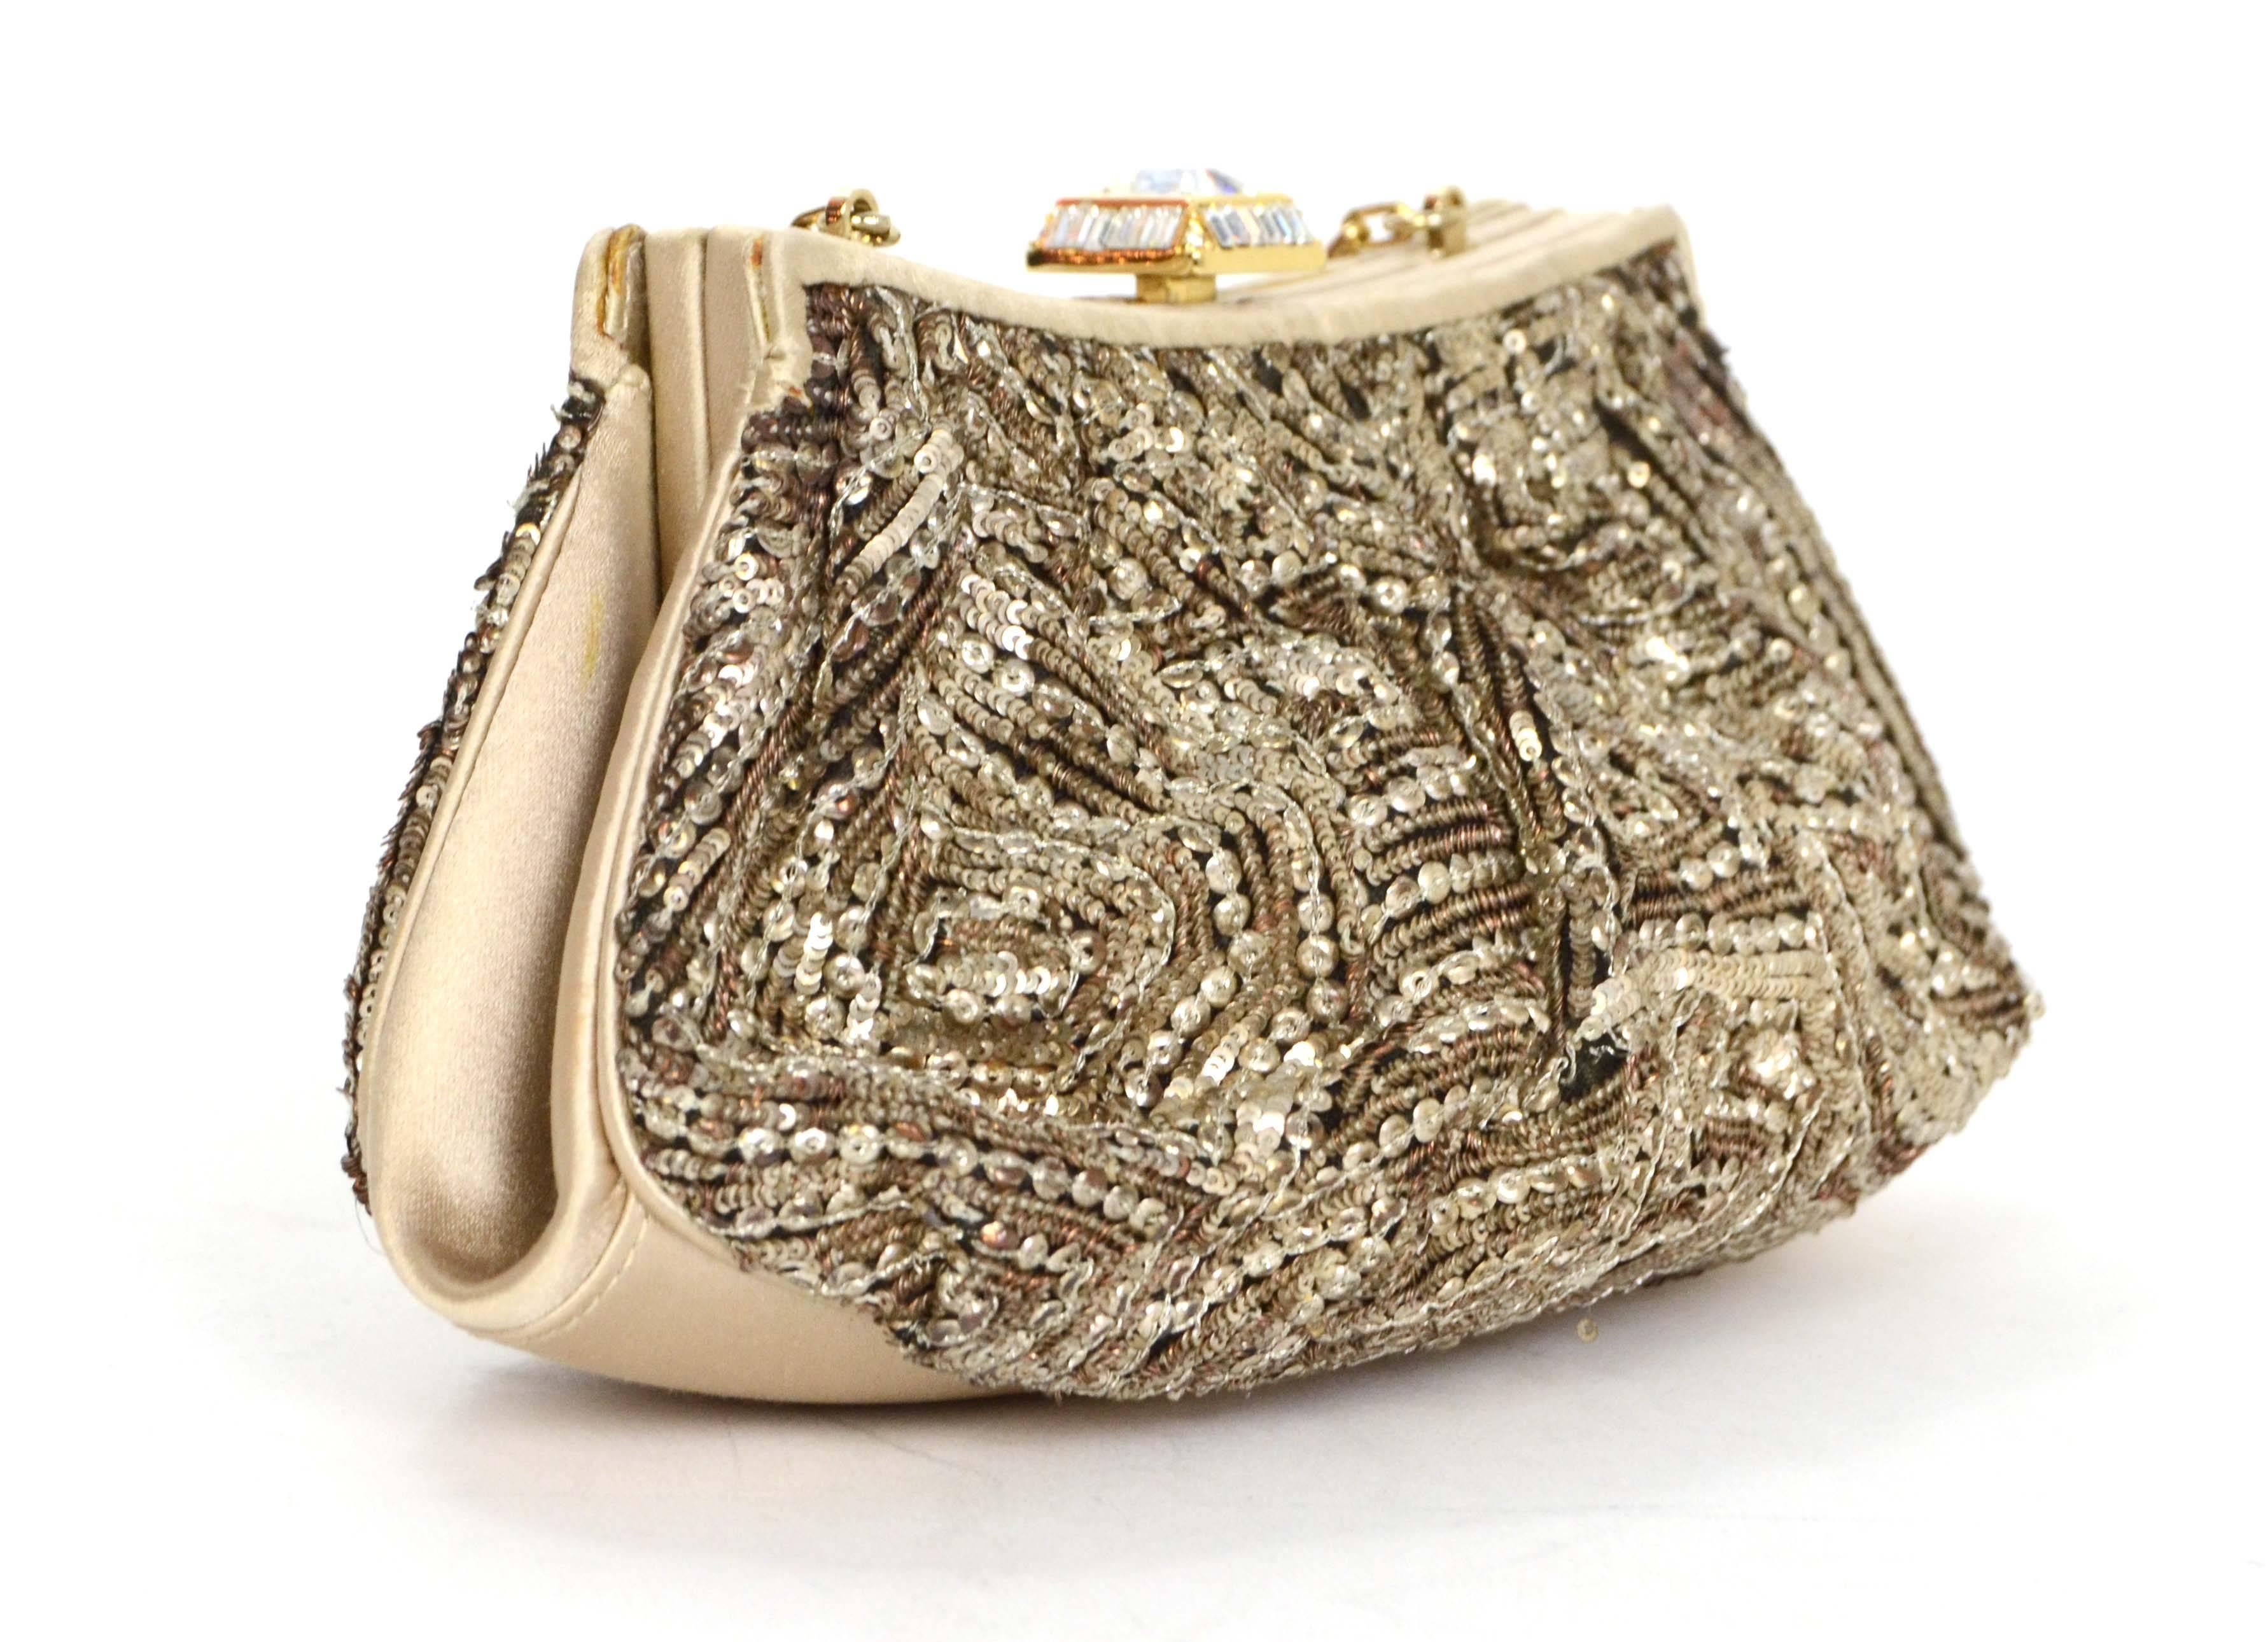 Judith Leiber Pewter Sequin Evening Bag 
Features crystal embellished top lever and shoulder strap
Made In: Italy
Color: Pewter and champagne 
Hardware: Goldtone
Materials: Sequins, satin, crystal and metal
Lining: Purple